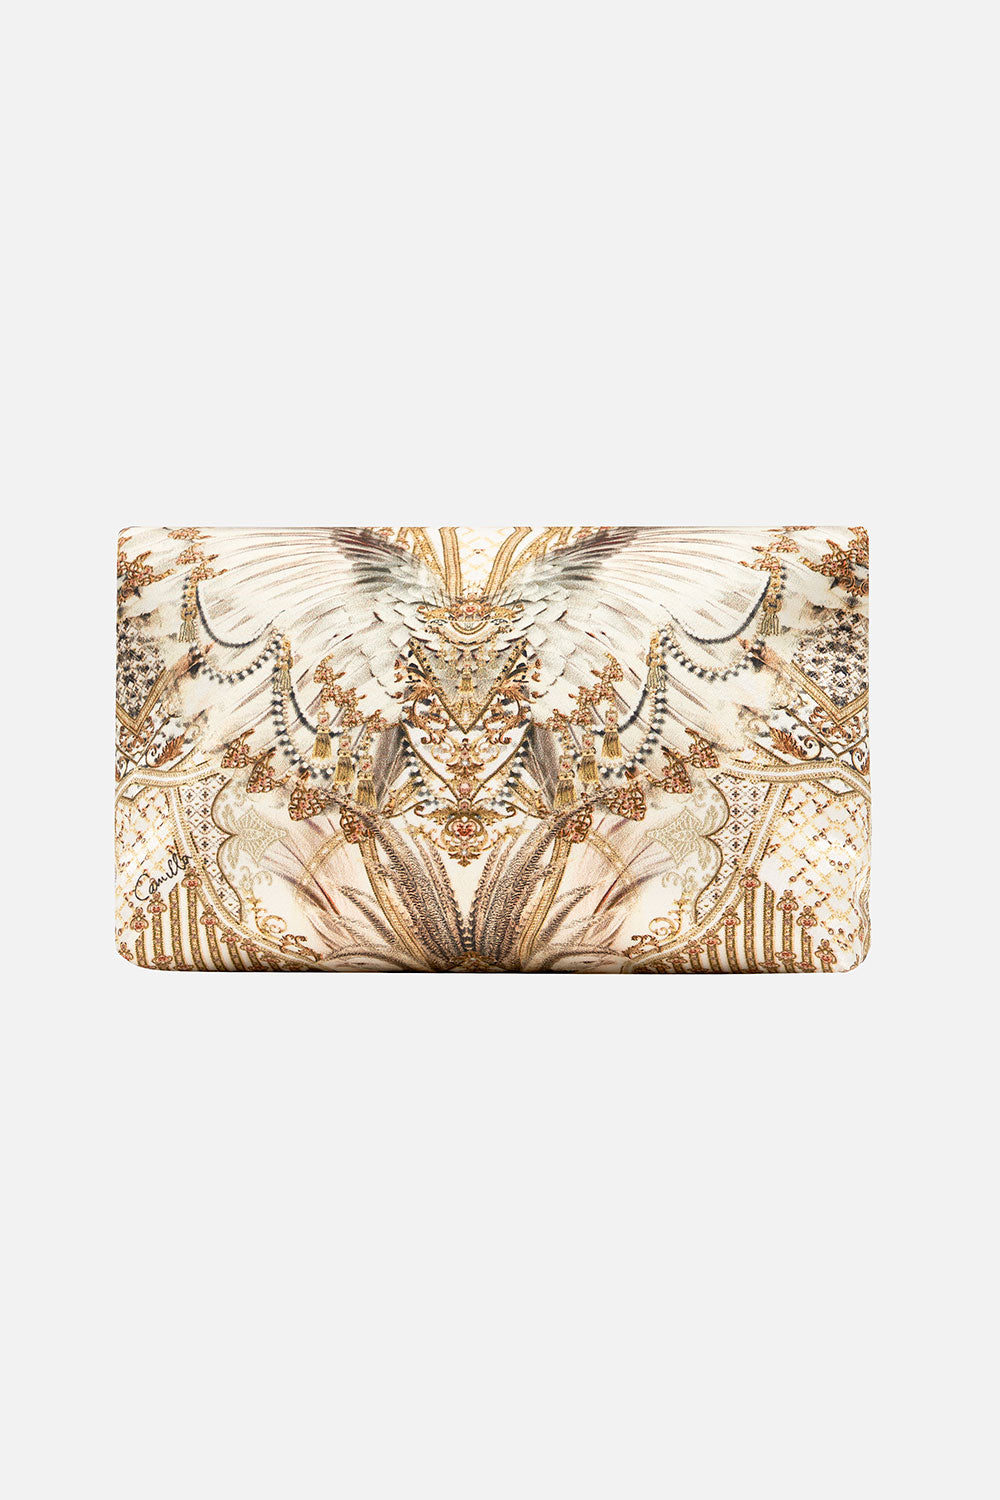 ENVELOPE CLUTCH WITH GUSSET SOAR LIKE AN EAGLE